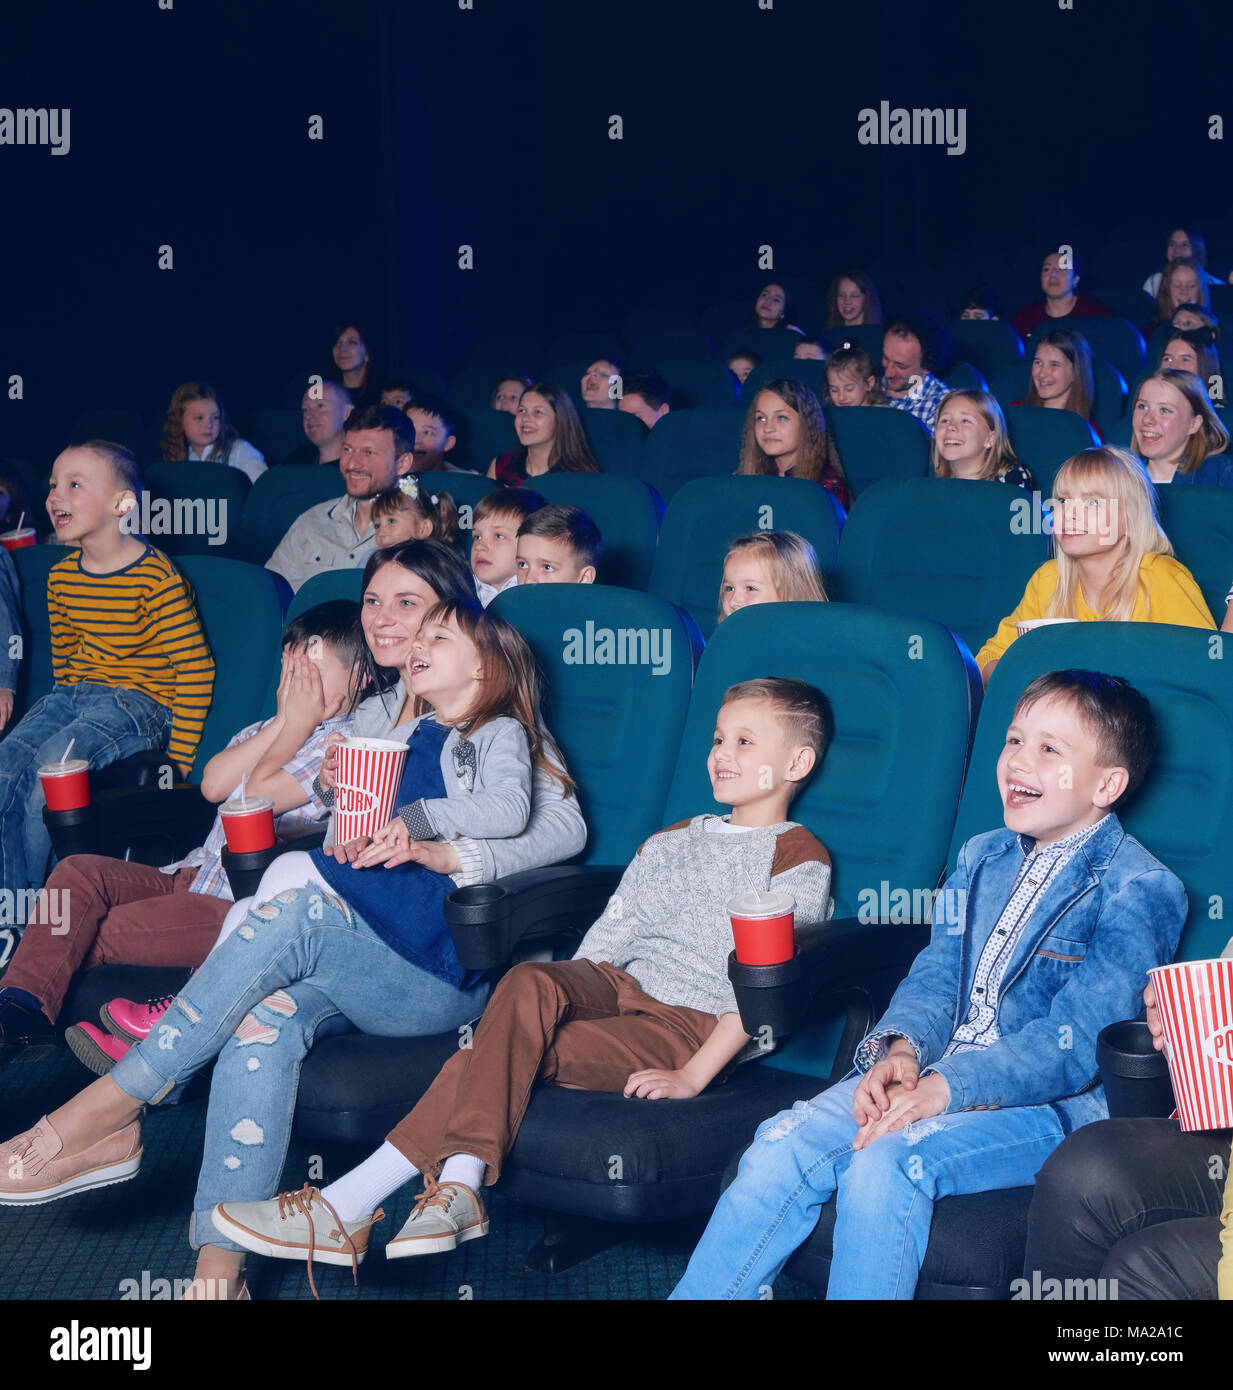 sideview of happy children watching interesting, funny movie, sitting on comfortable green places. Boys and girls laughing, smiling, eating popcorn and drinking fizzy drinks. Stock Photo